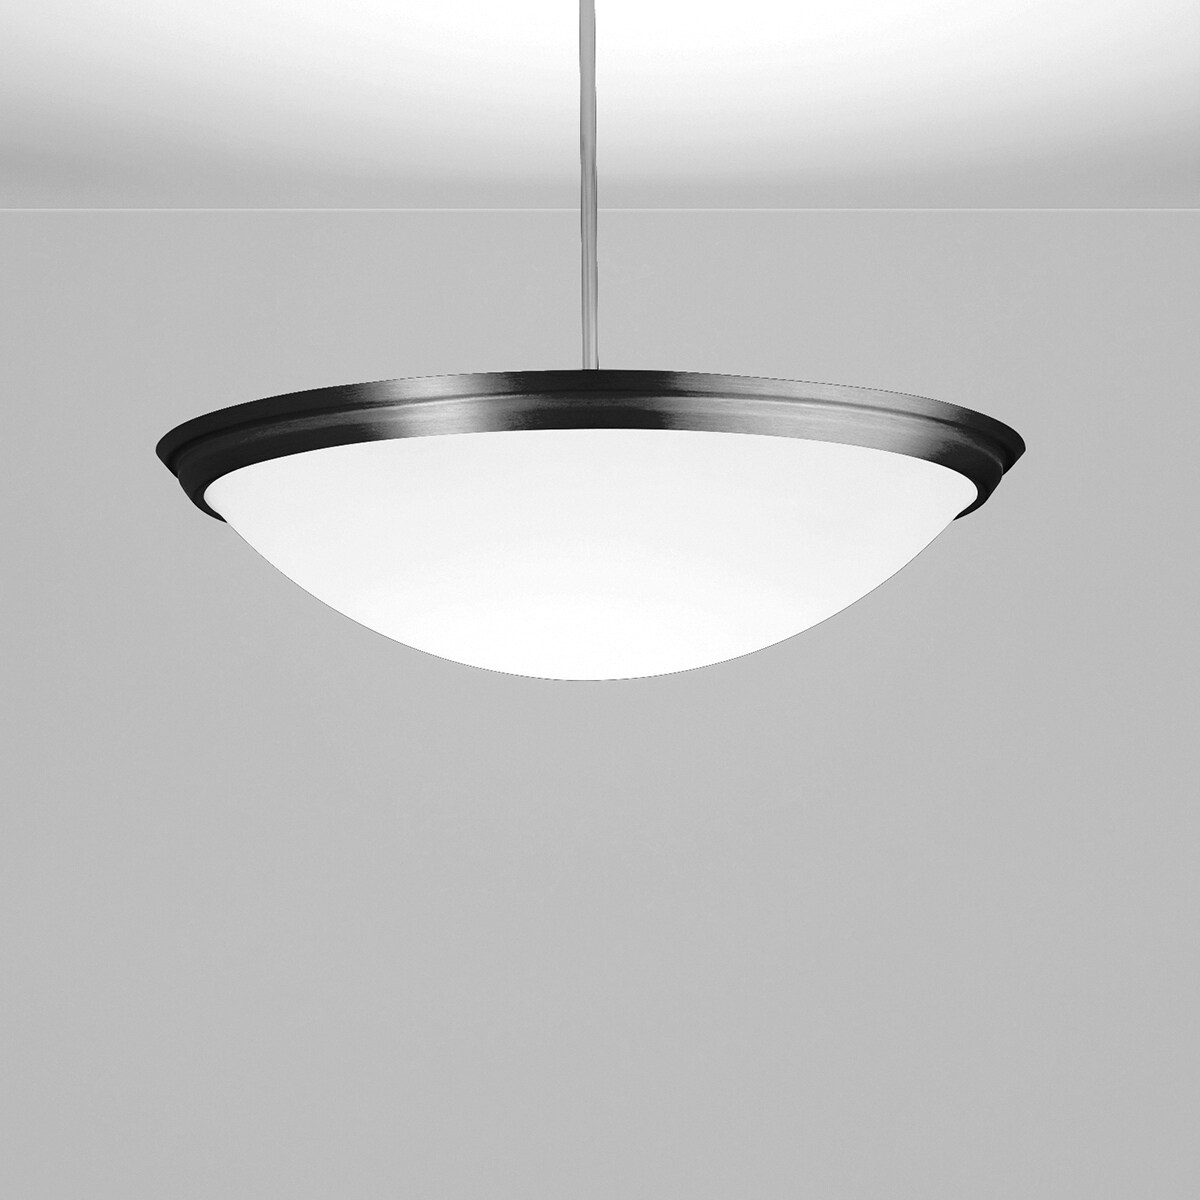 A large bowl pendant suspended with a stem